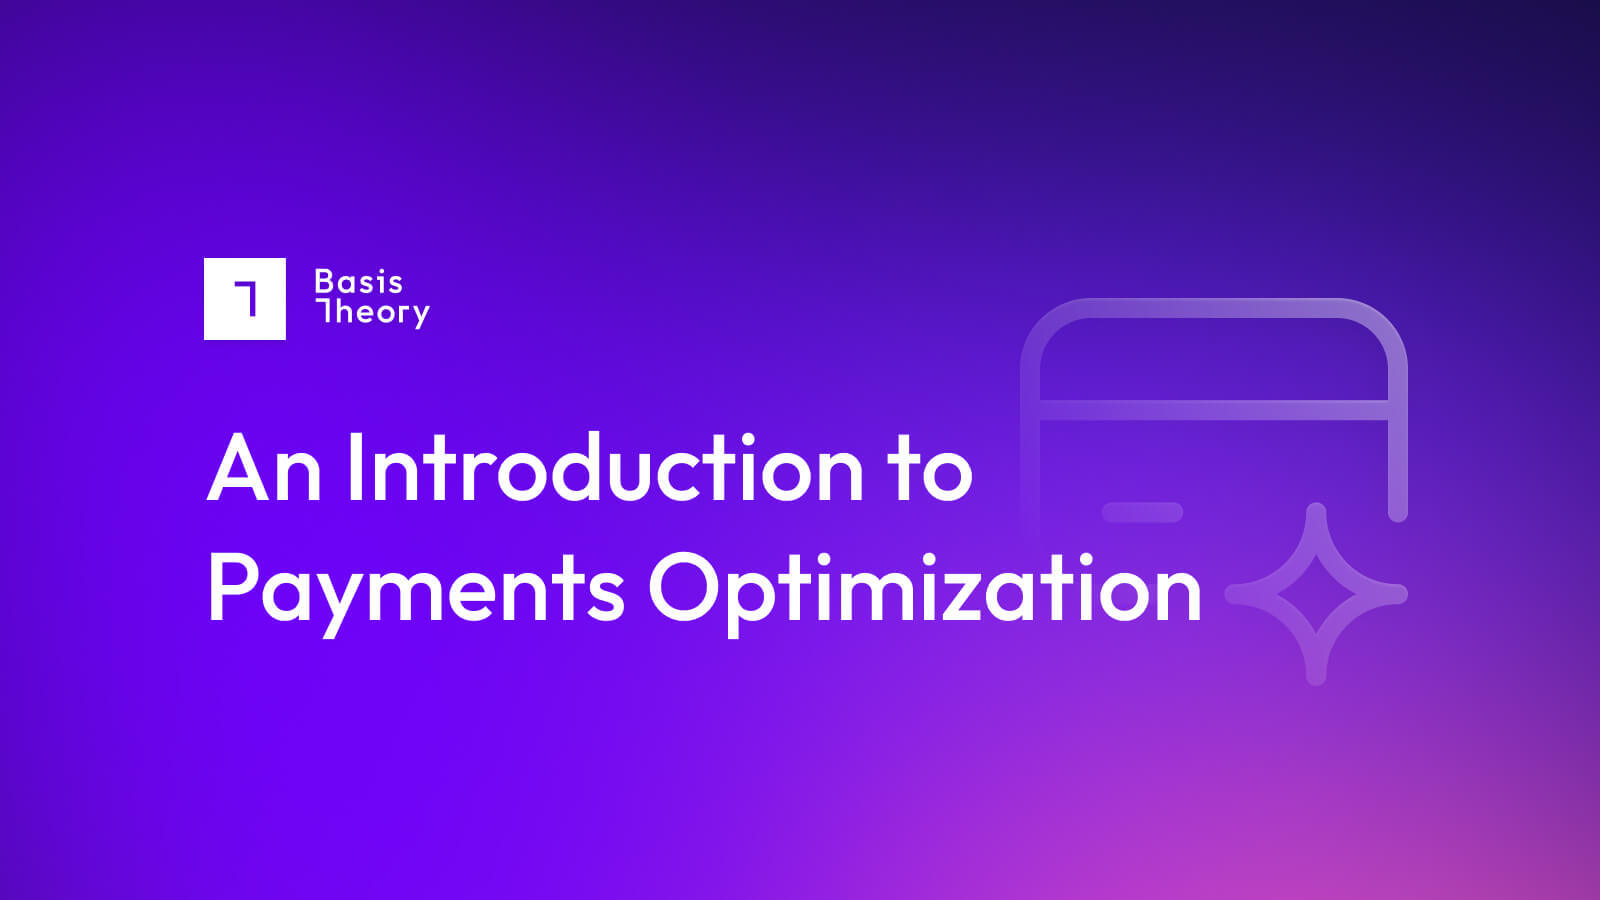 What is payment optimization? An introduction to payments optimization